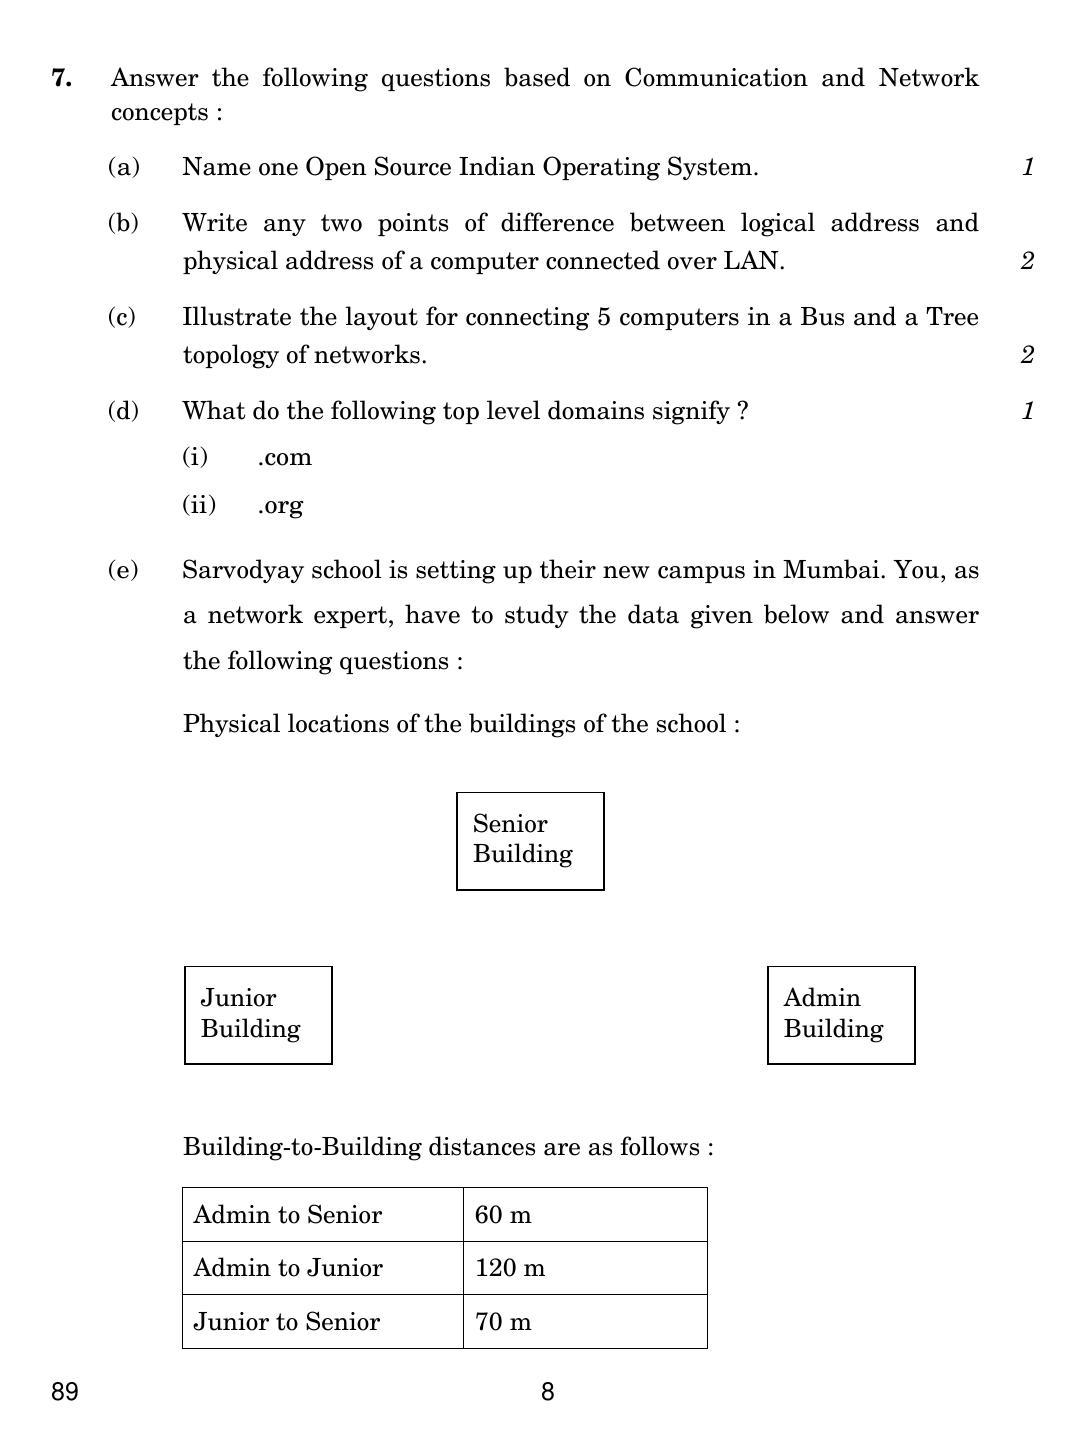 CBSE Class 12 89 MULTIMEDIA AND WEB TECHNOLOGY 2017 Question Paper - Page 8